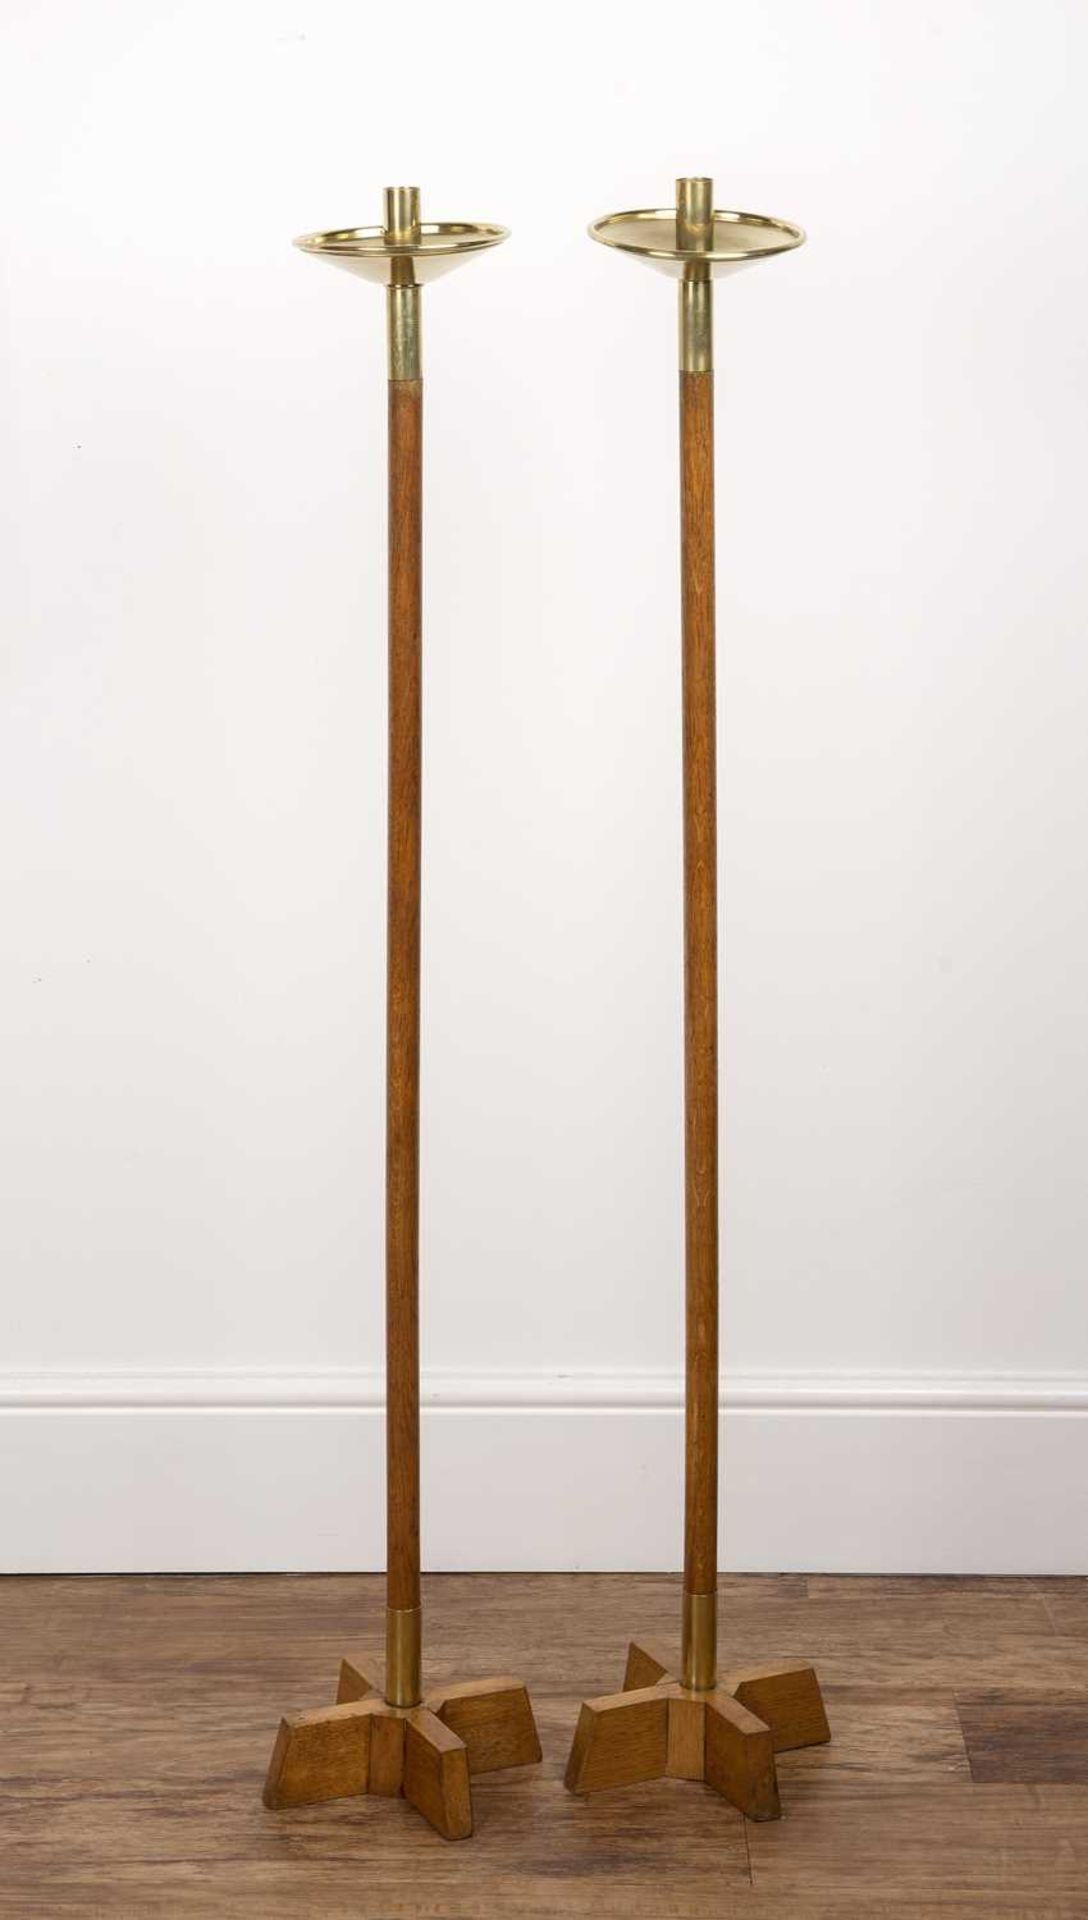 A pair of oak and brass tall floor standing candle stands in the Arts & Crafts style, 118cm high